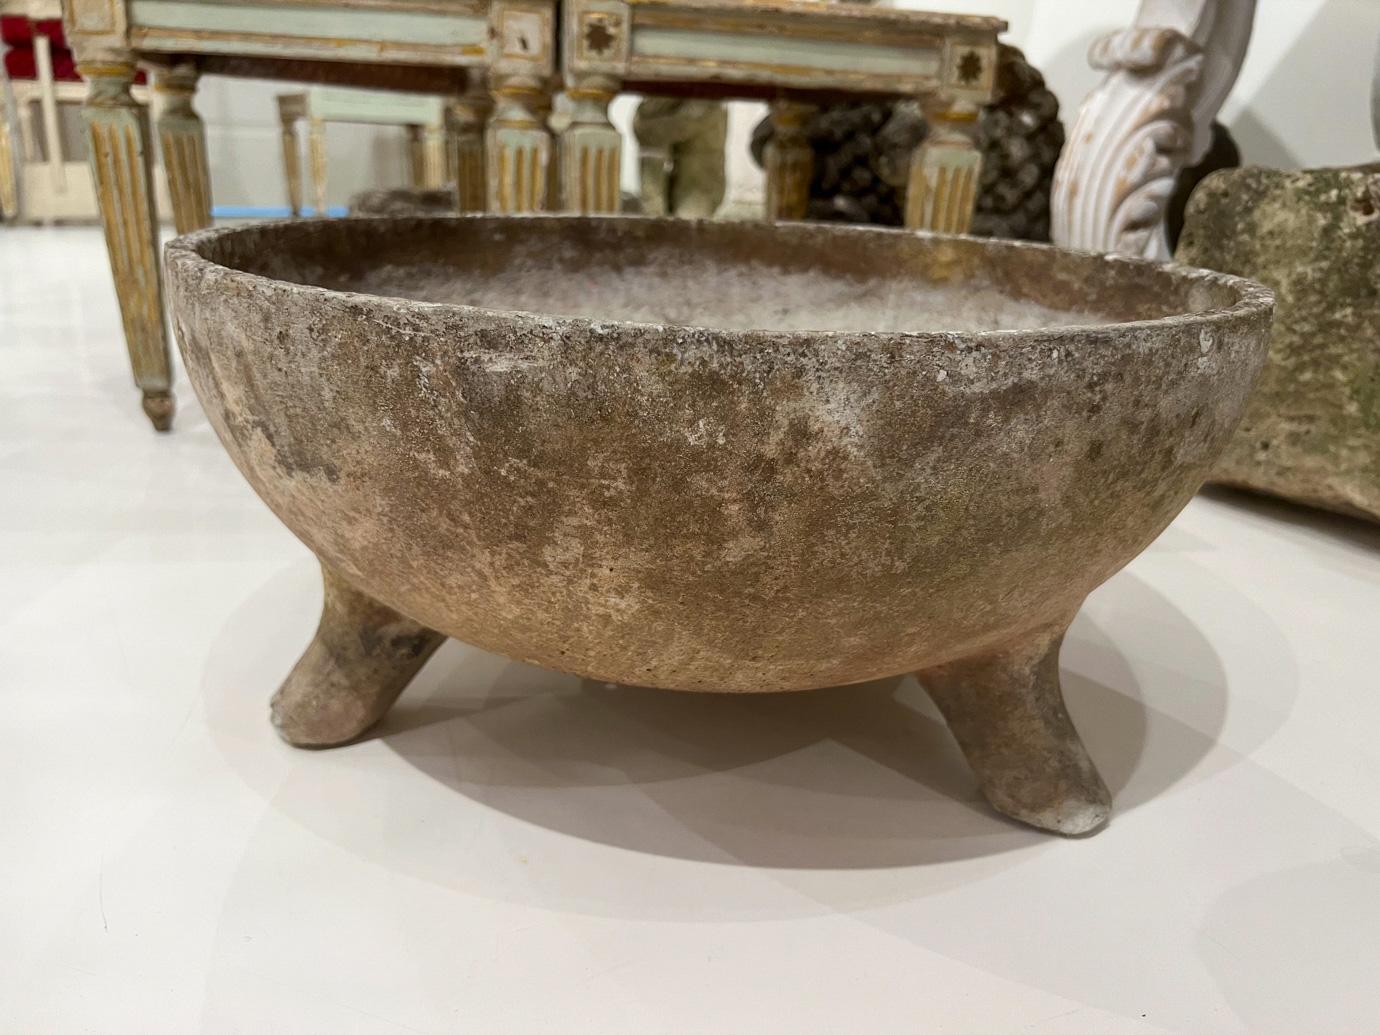 Willy Guhl was a famous Swiss designer who created planters in many shapes. These are formed from a slab of Eternit (a fibrous concrete material) moulded into a bowl with feet. 
   